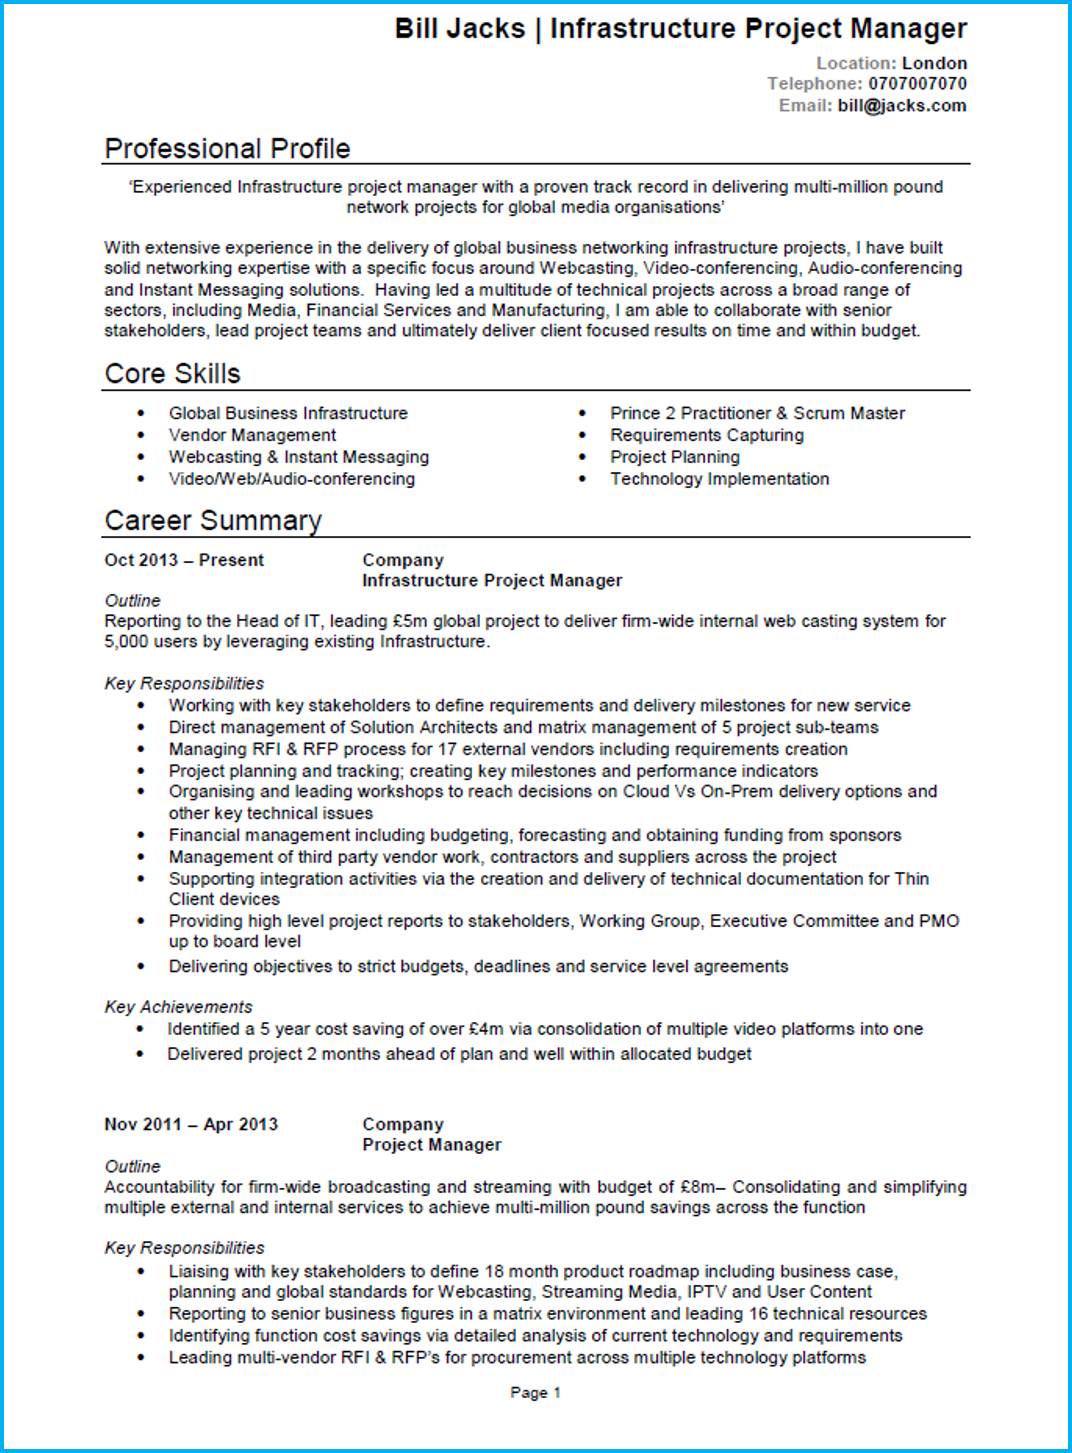 1 Page Cv Template Uk  